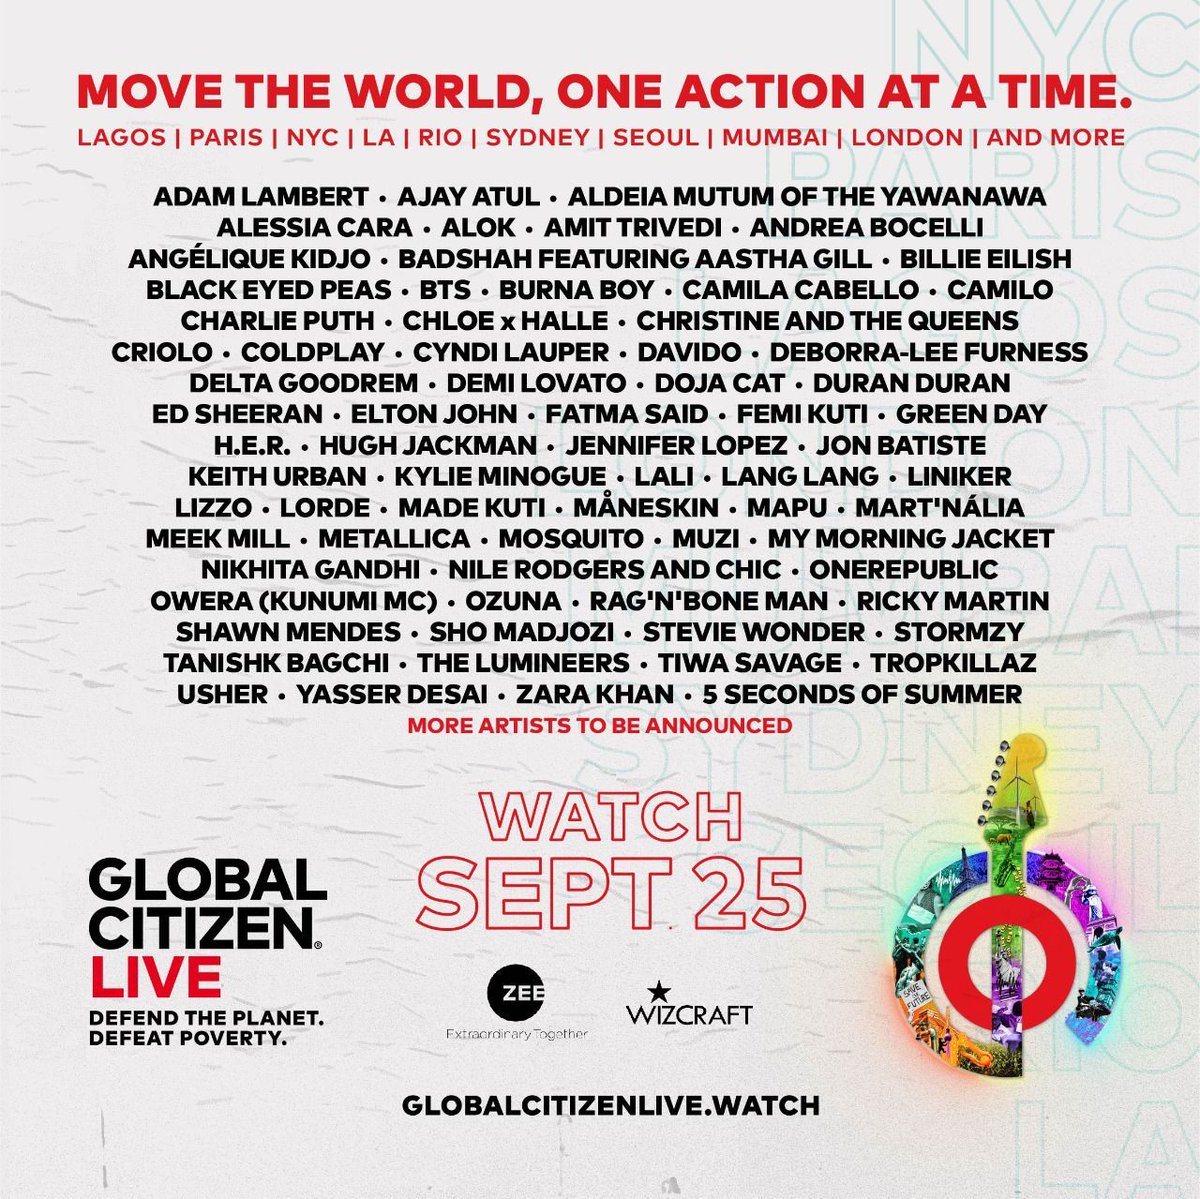 The biggest stars like @SrBachchan @AnilKapoor @advani_kiara & @Its_Badshah are joining together with @glblctzn for #GlobalCitizenLive - 25th Sept, 9.30 PM IST on Zee! Find out how you can tune in: glblctzn.me/globalcitizenl… #MoveTheWorld #GlobalCitizenLive #GlobalCitizenLiveMumbai